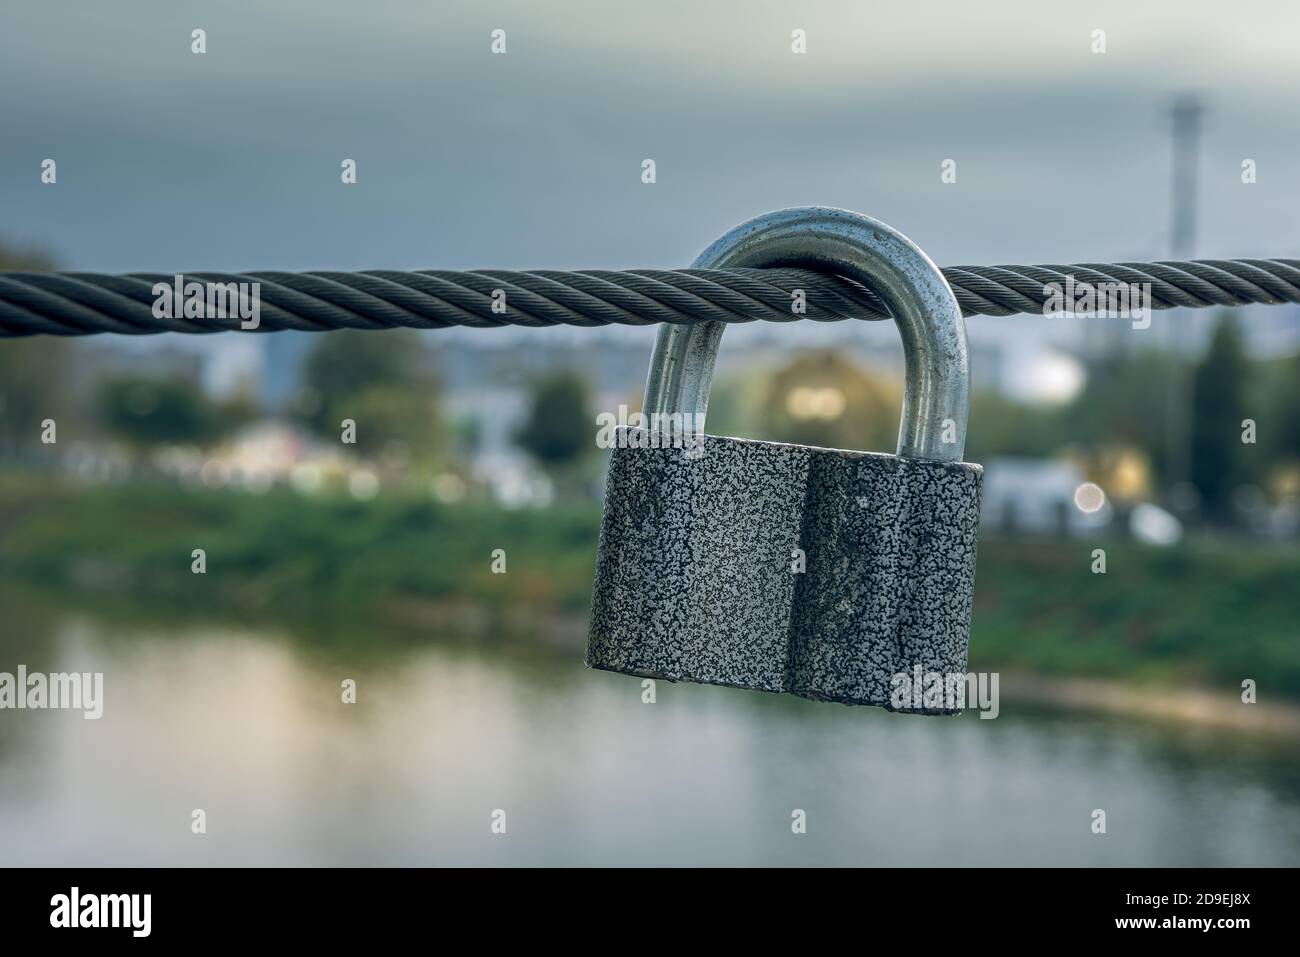 Metal padlock hanging on steel cable of bridge fence. Unfocused cityscape with evening lights at background. Horizontal orientation. Selective focus. Stock Photo